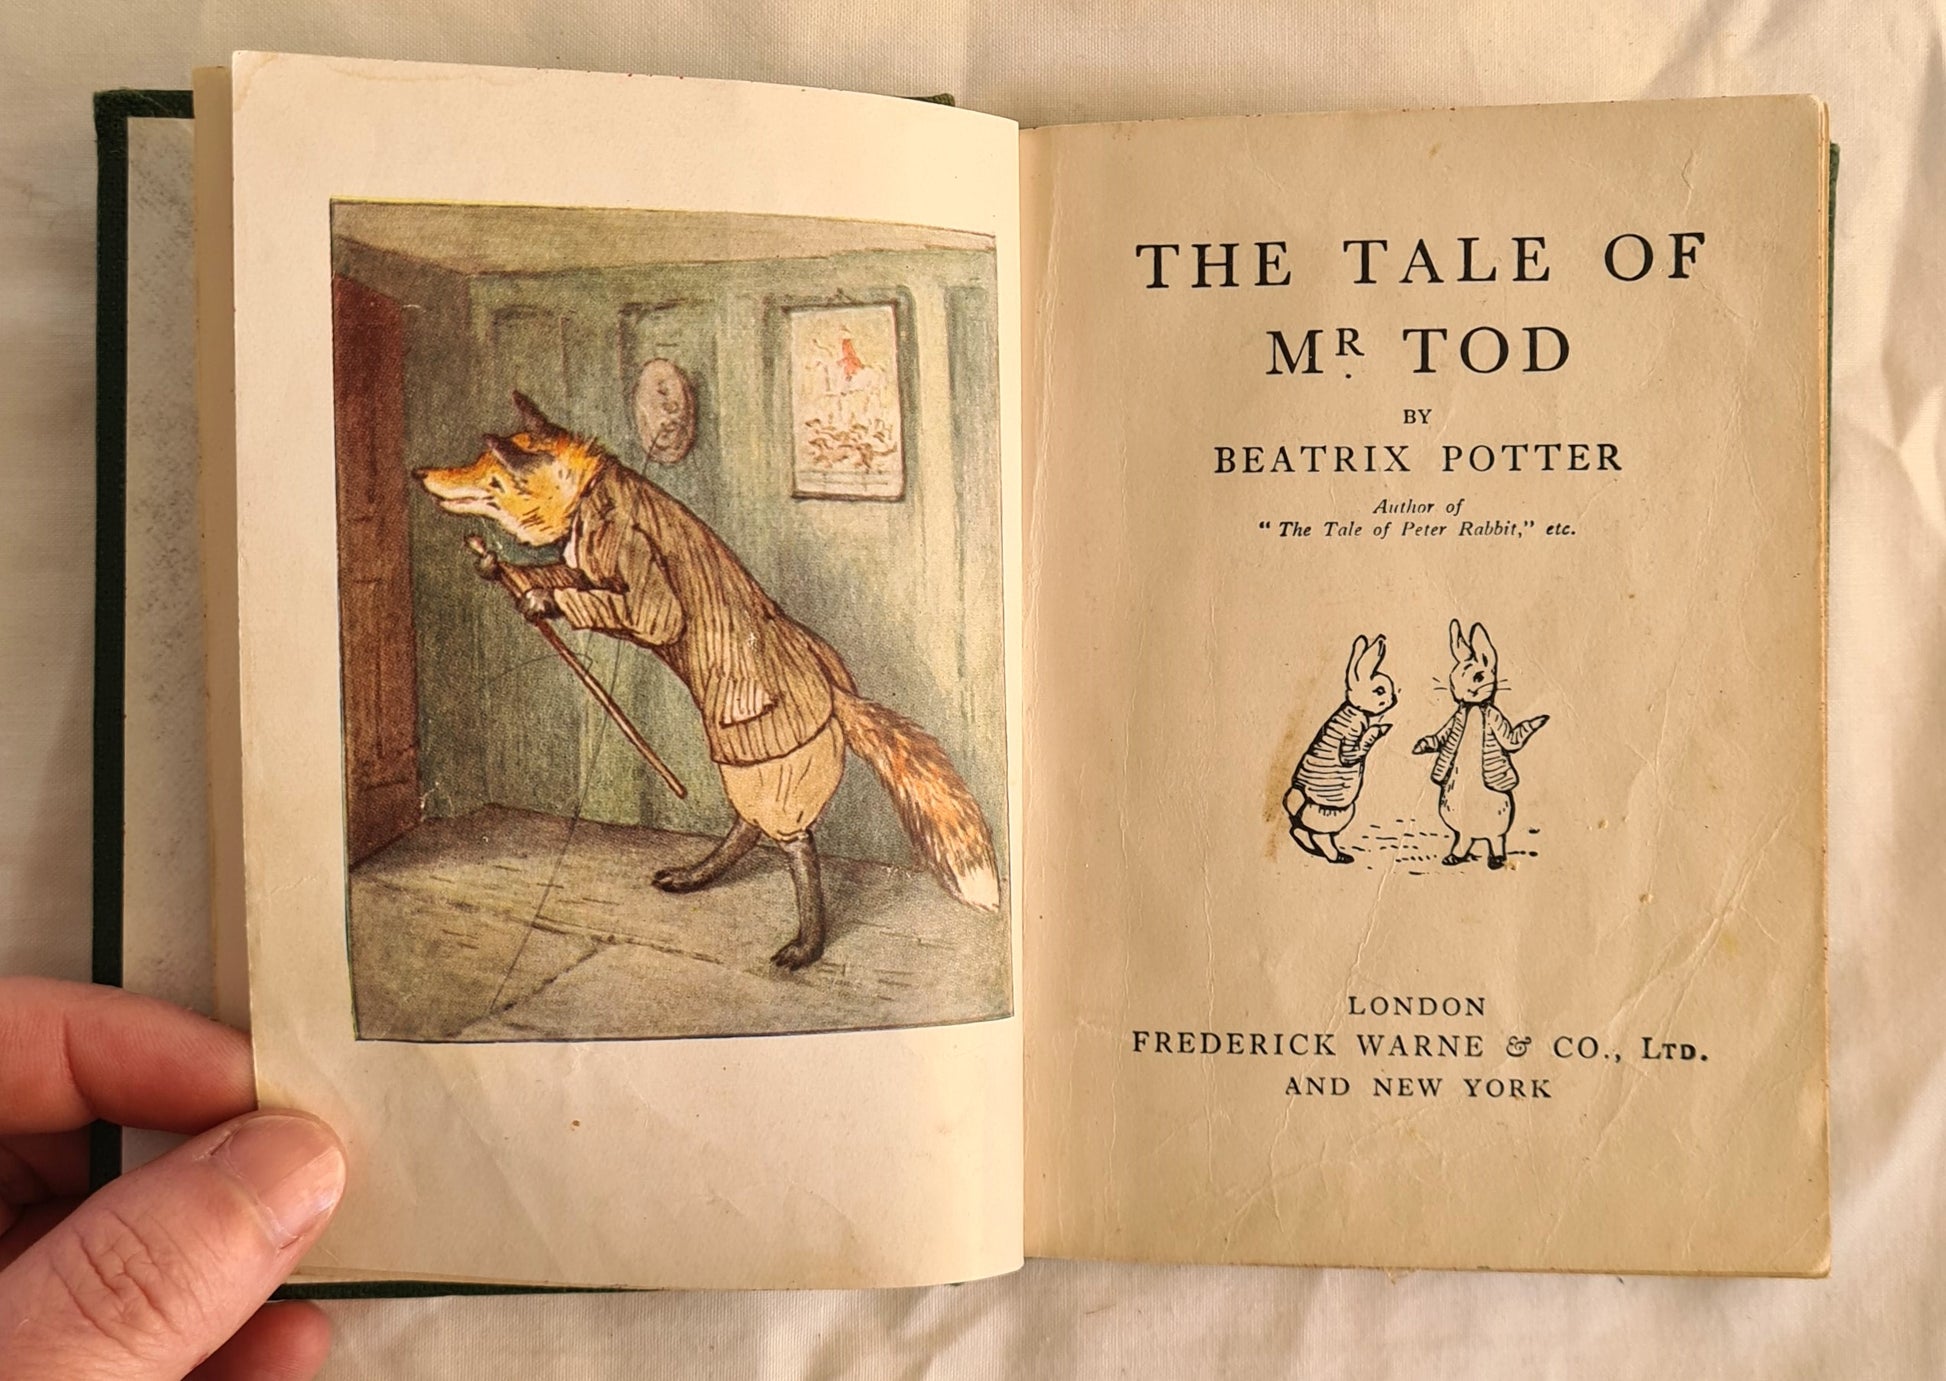 The Tale of Mr Tod  by Beatrix Potter